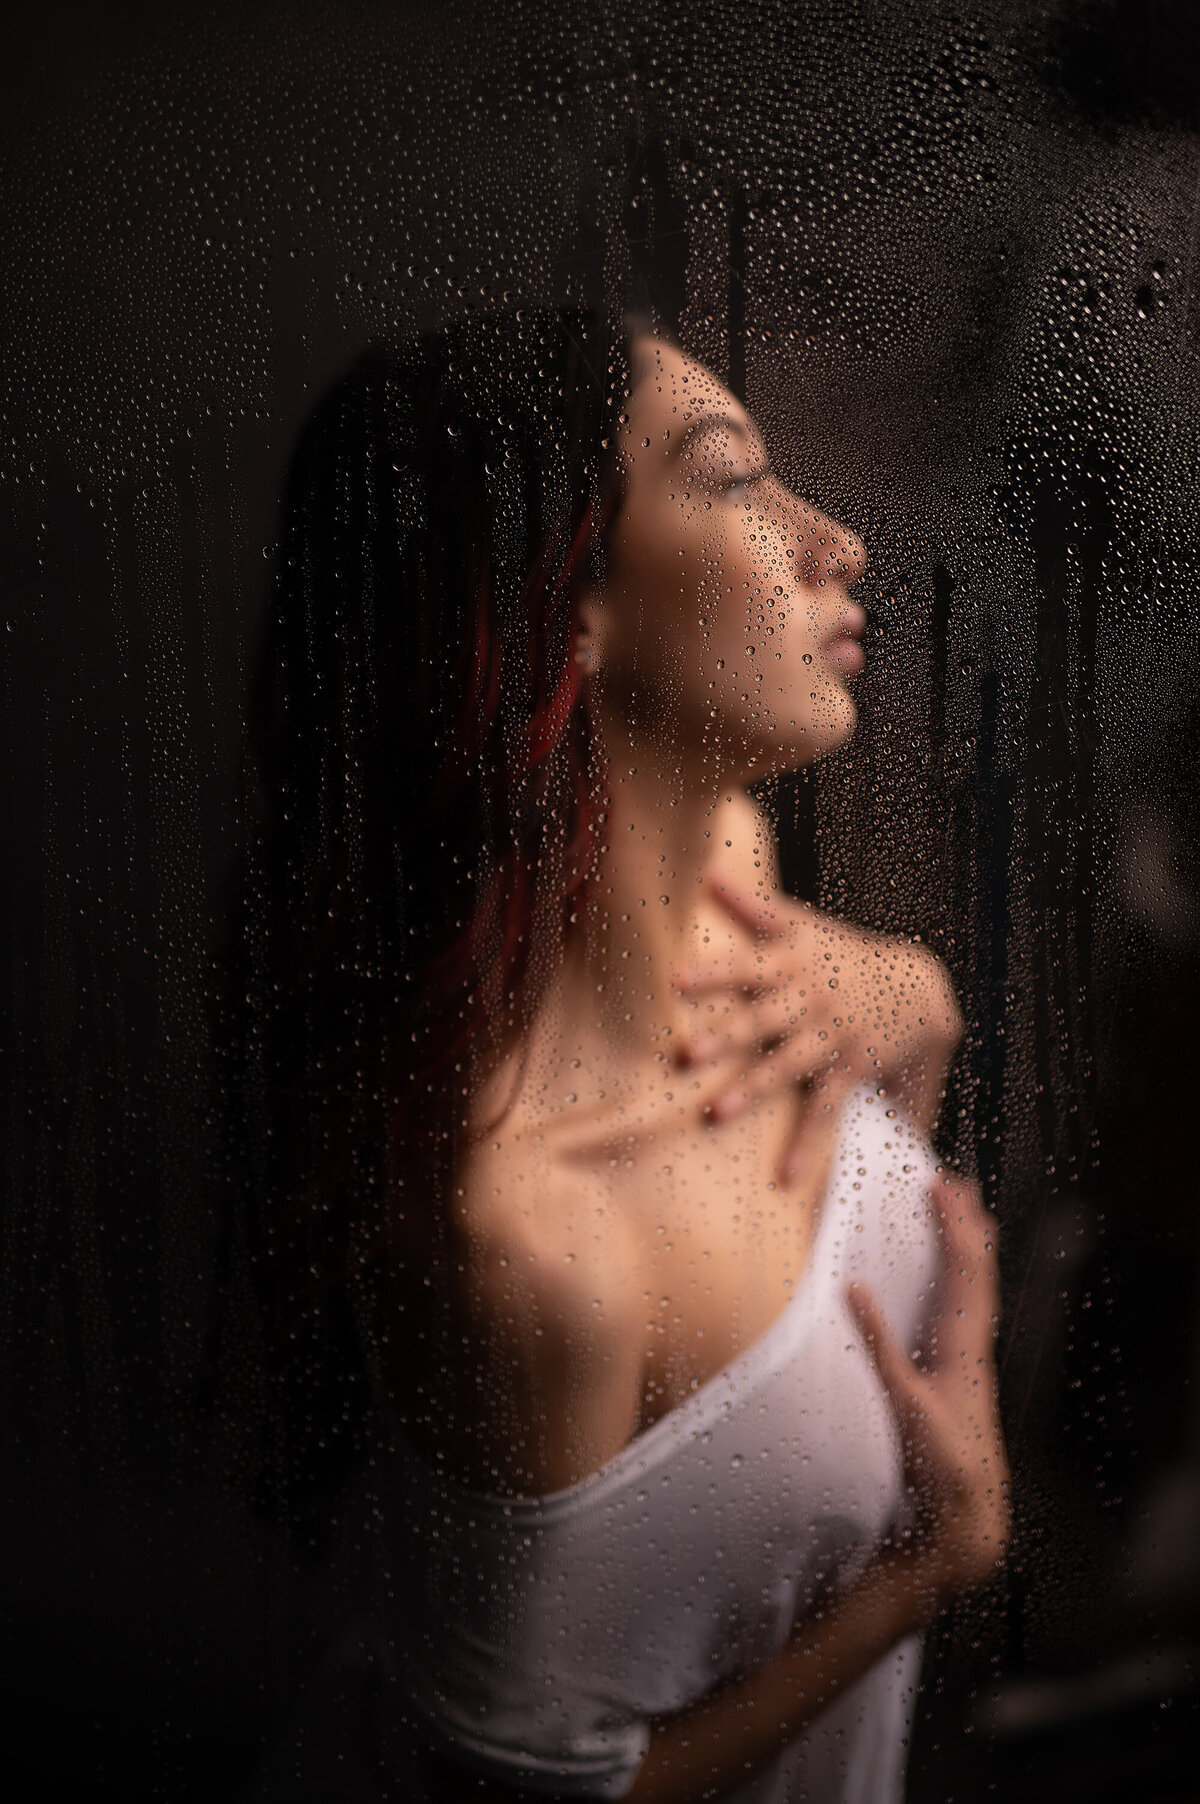 A woman in a sheer white tshirt stands in a steaming shower for her boudoir photo shoot.